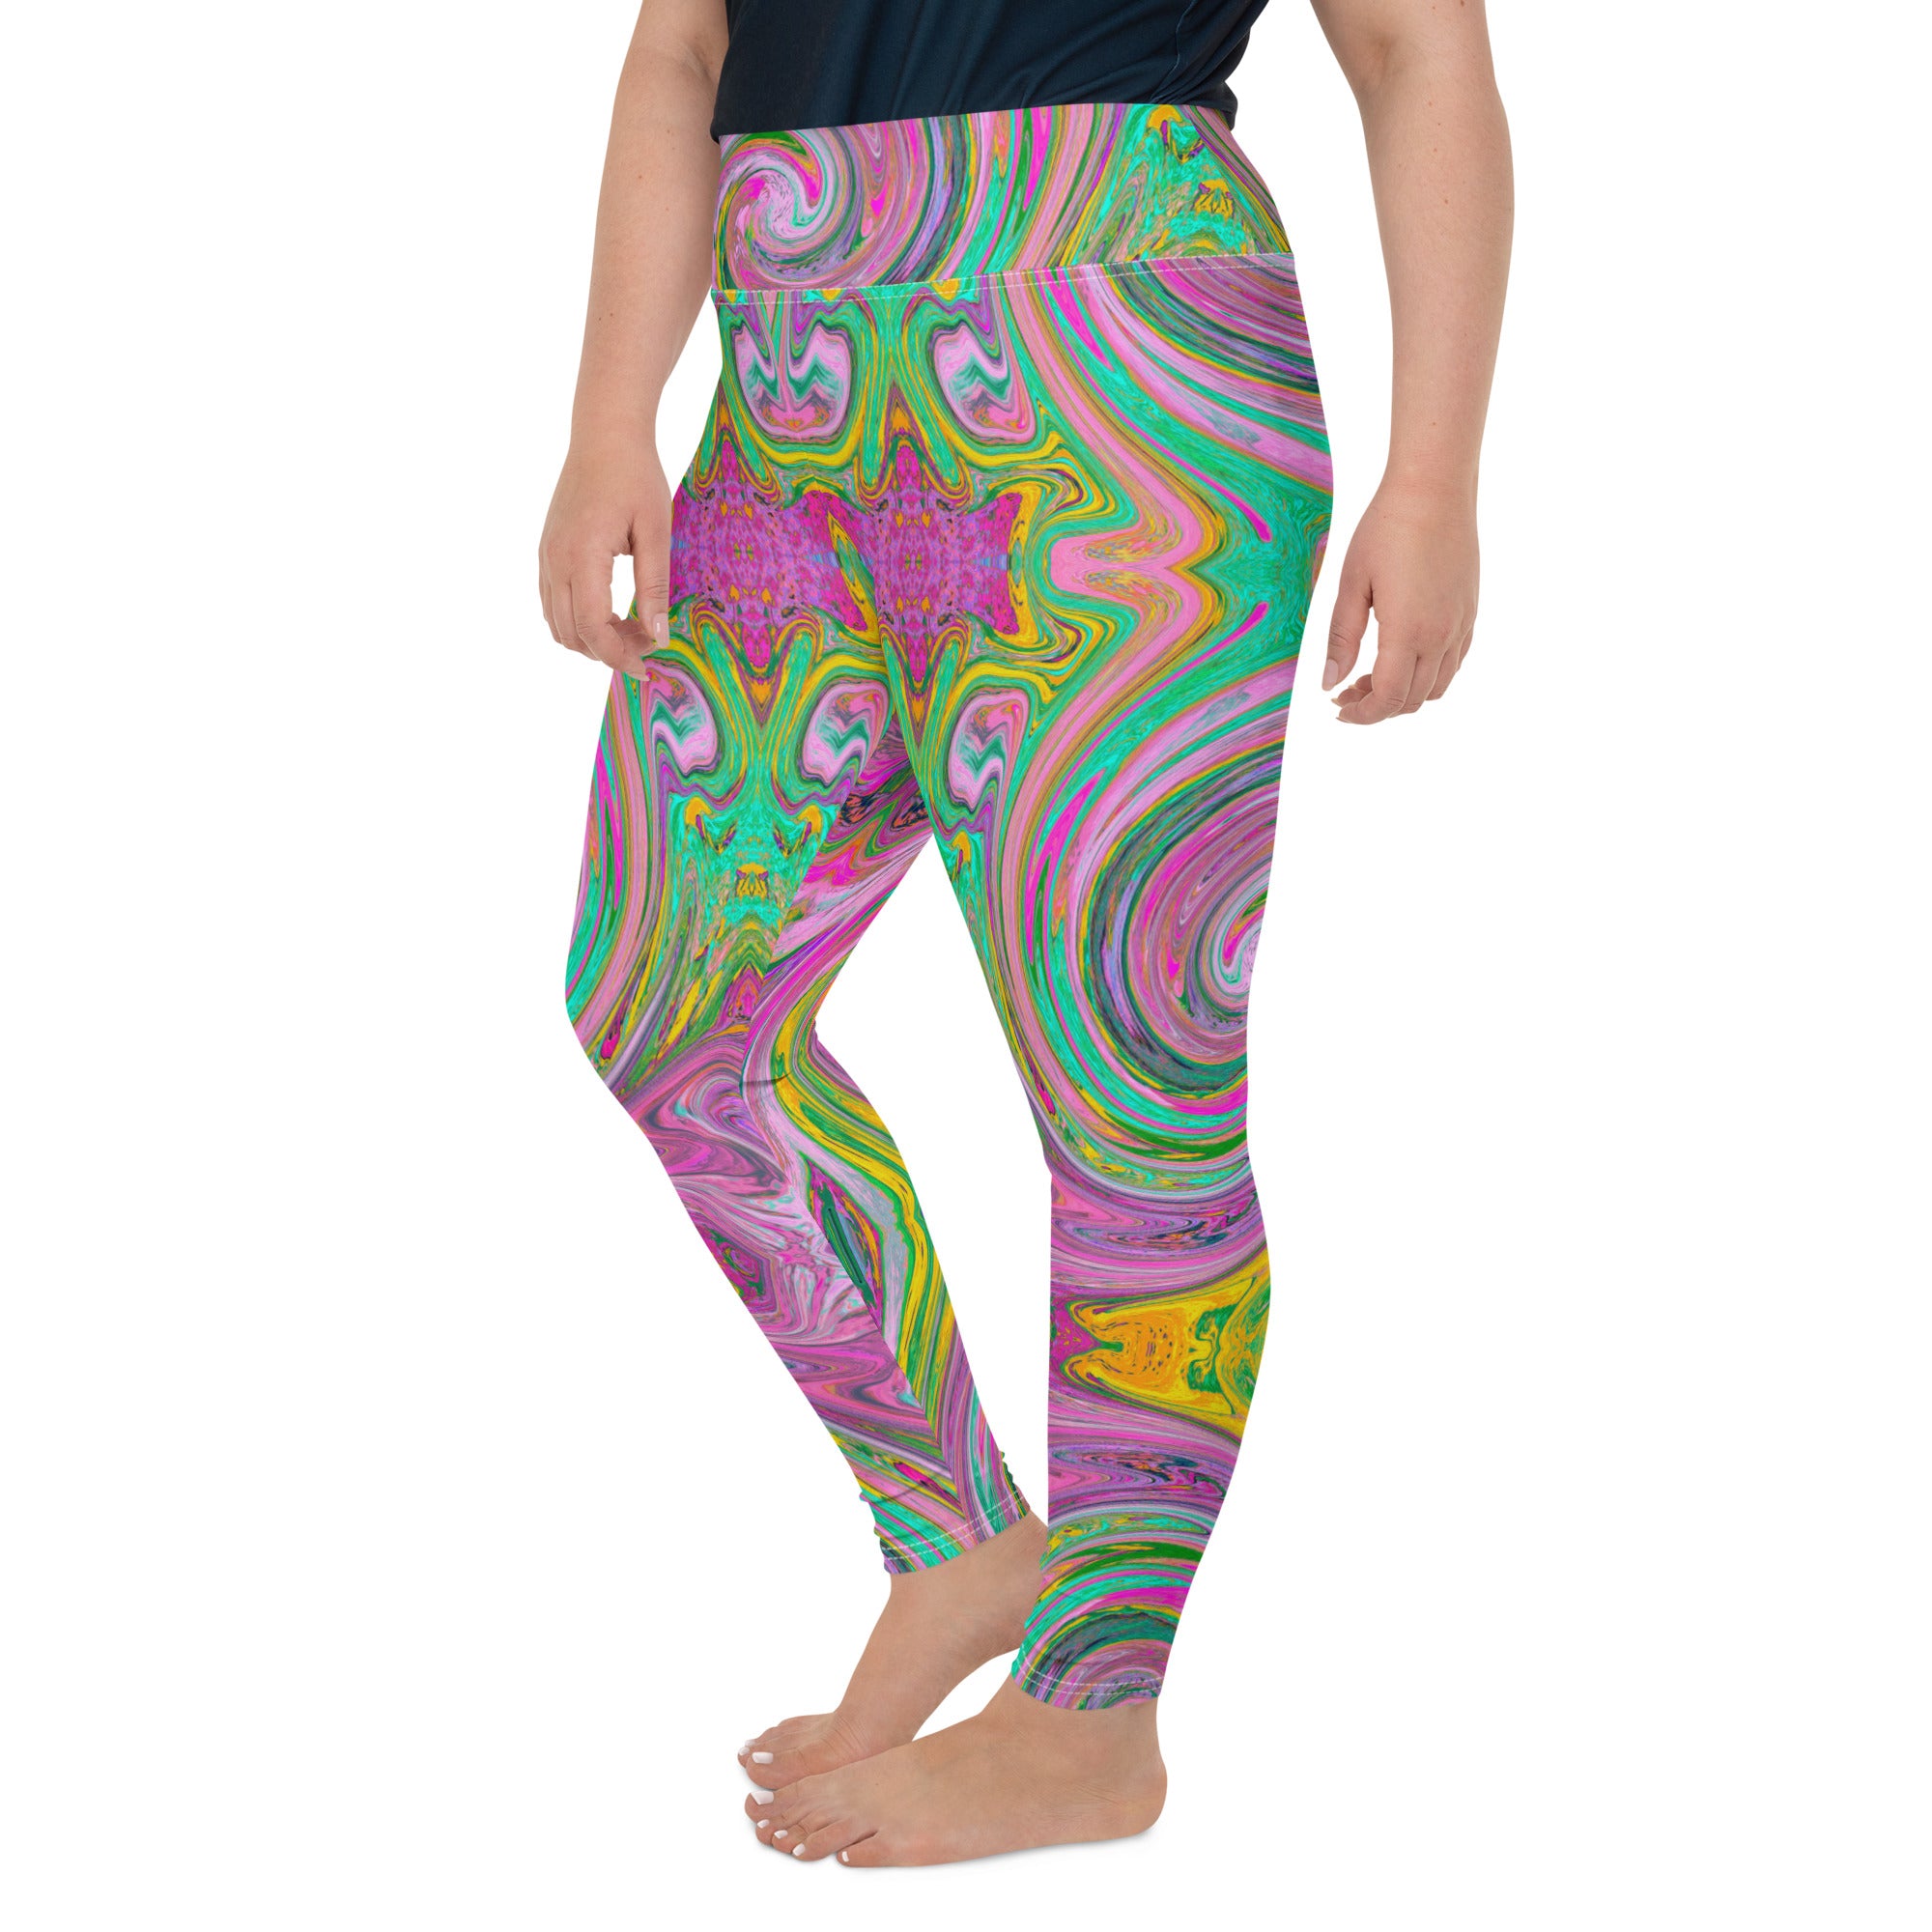 Plus Size Leggings - Groovy Abstract Retro Pink and Mint Green Swirl